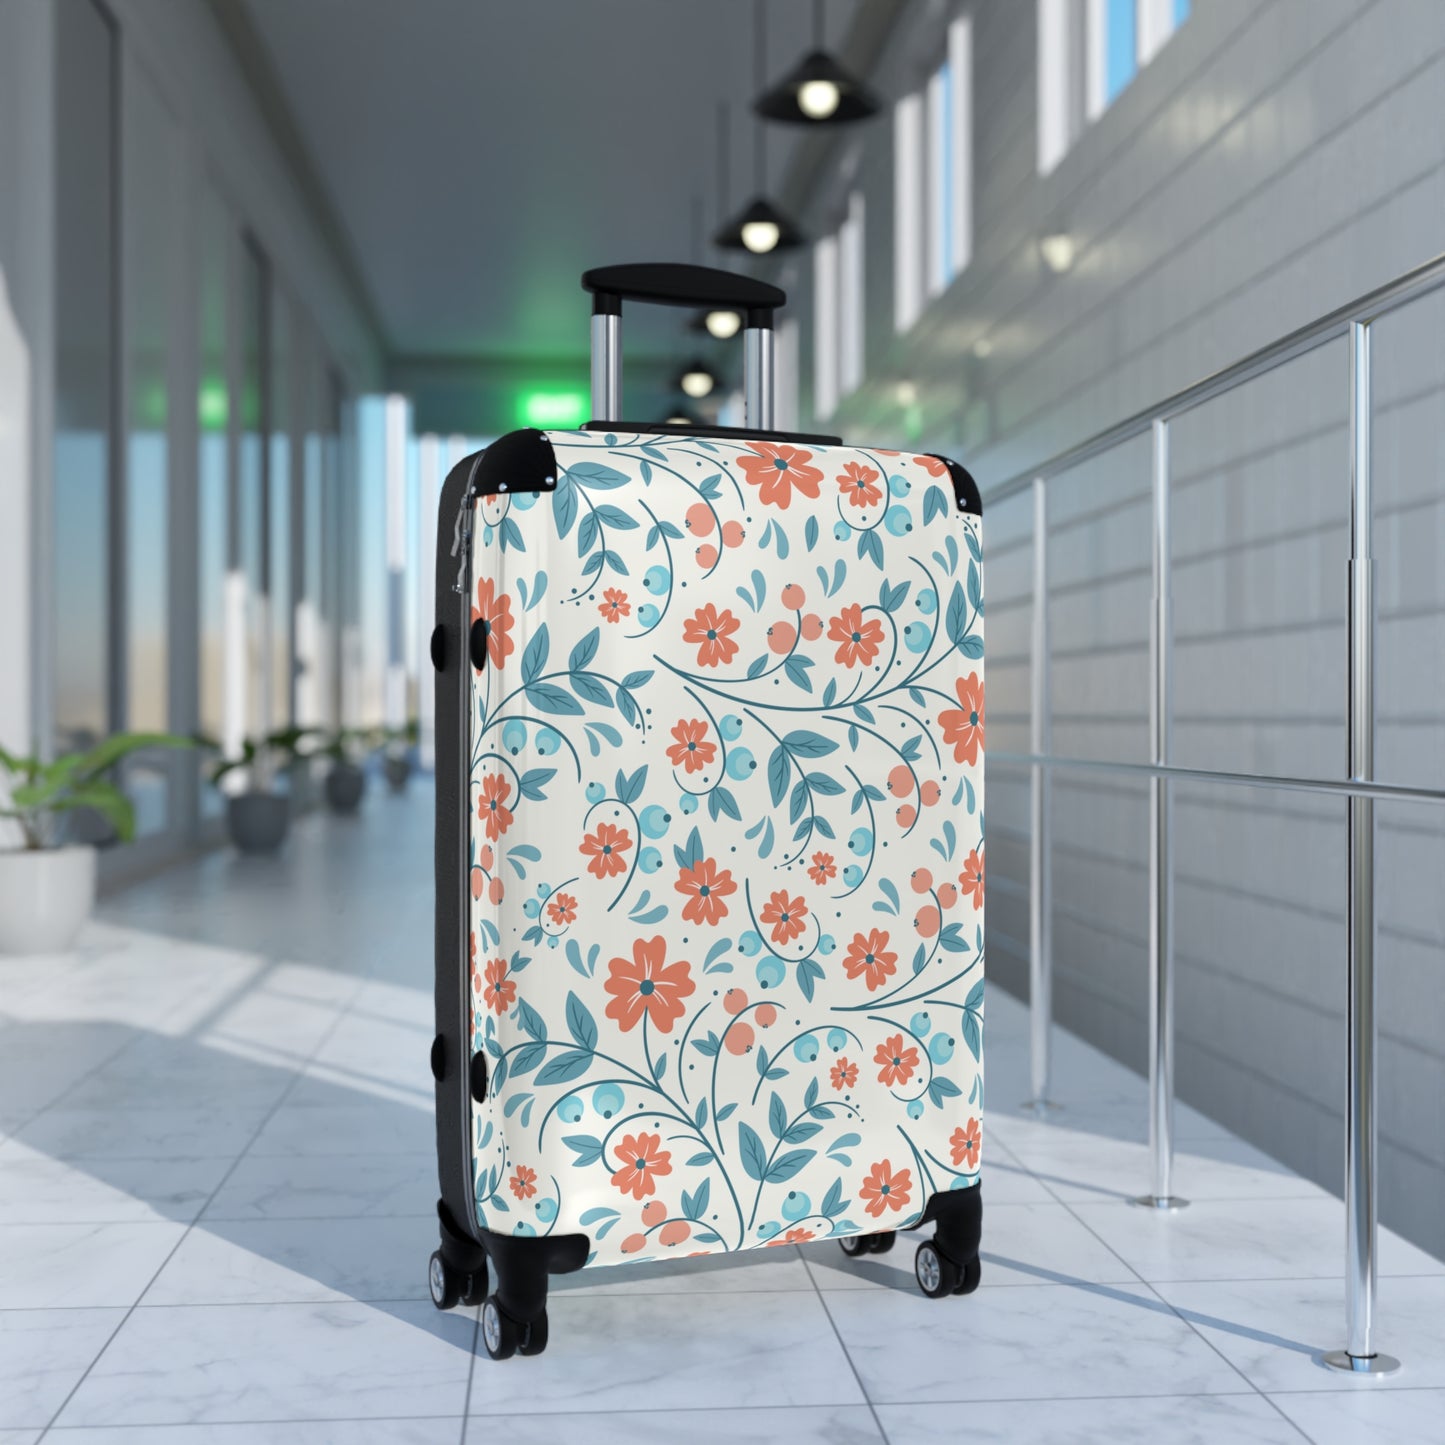 Olivia's Floral Travel Collection | Suitcase